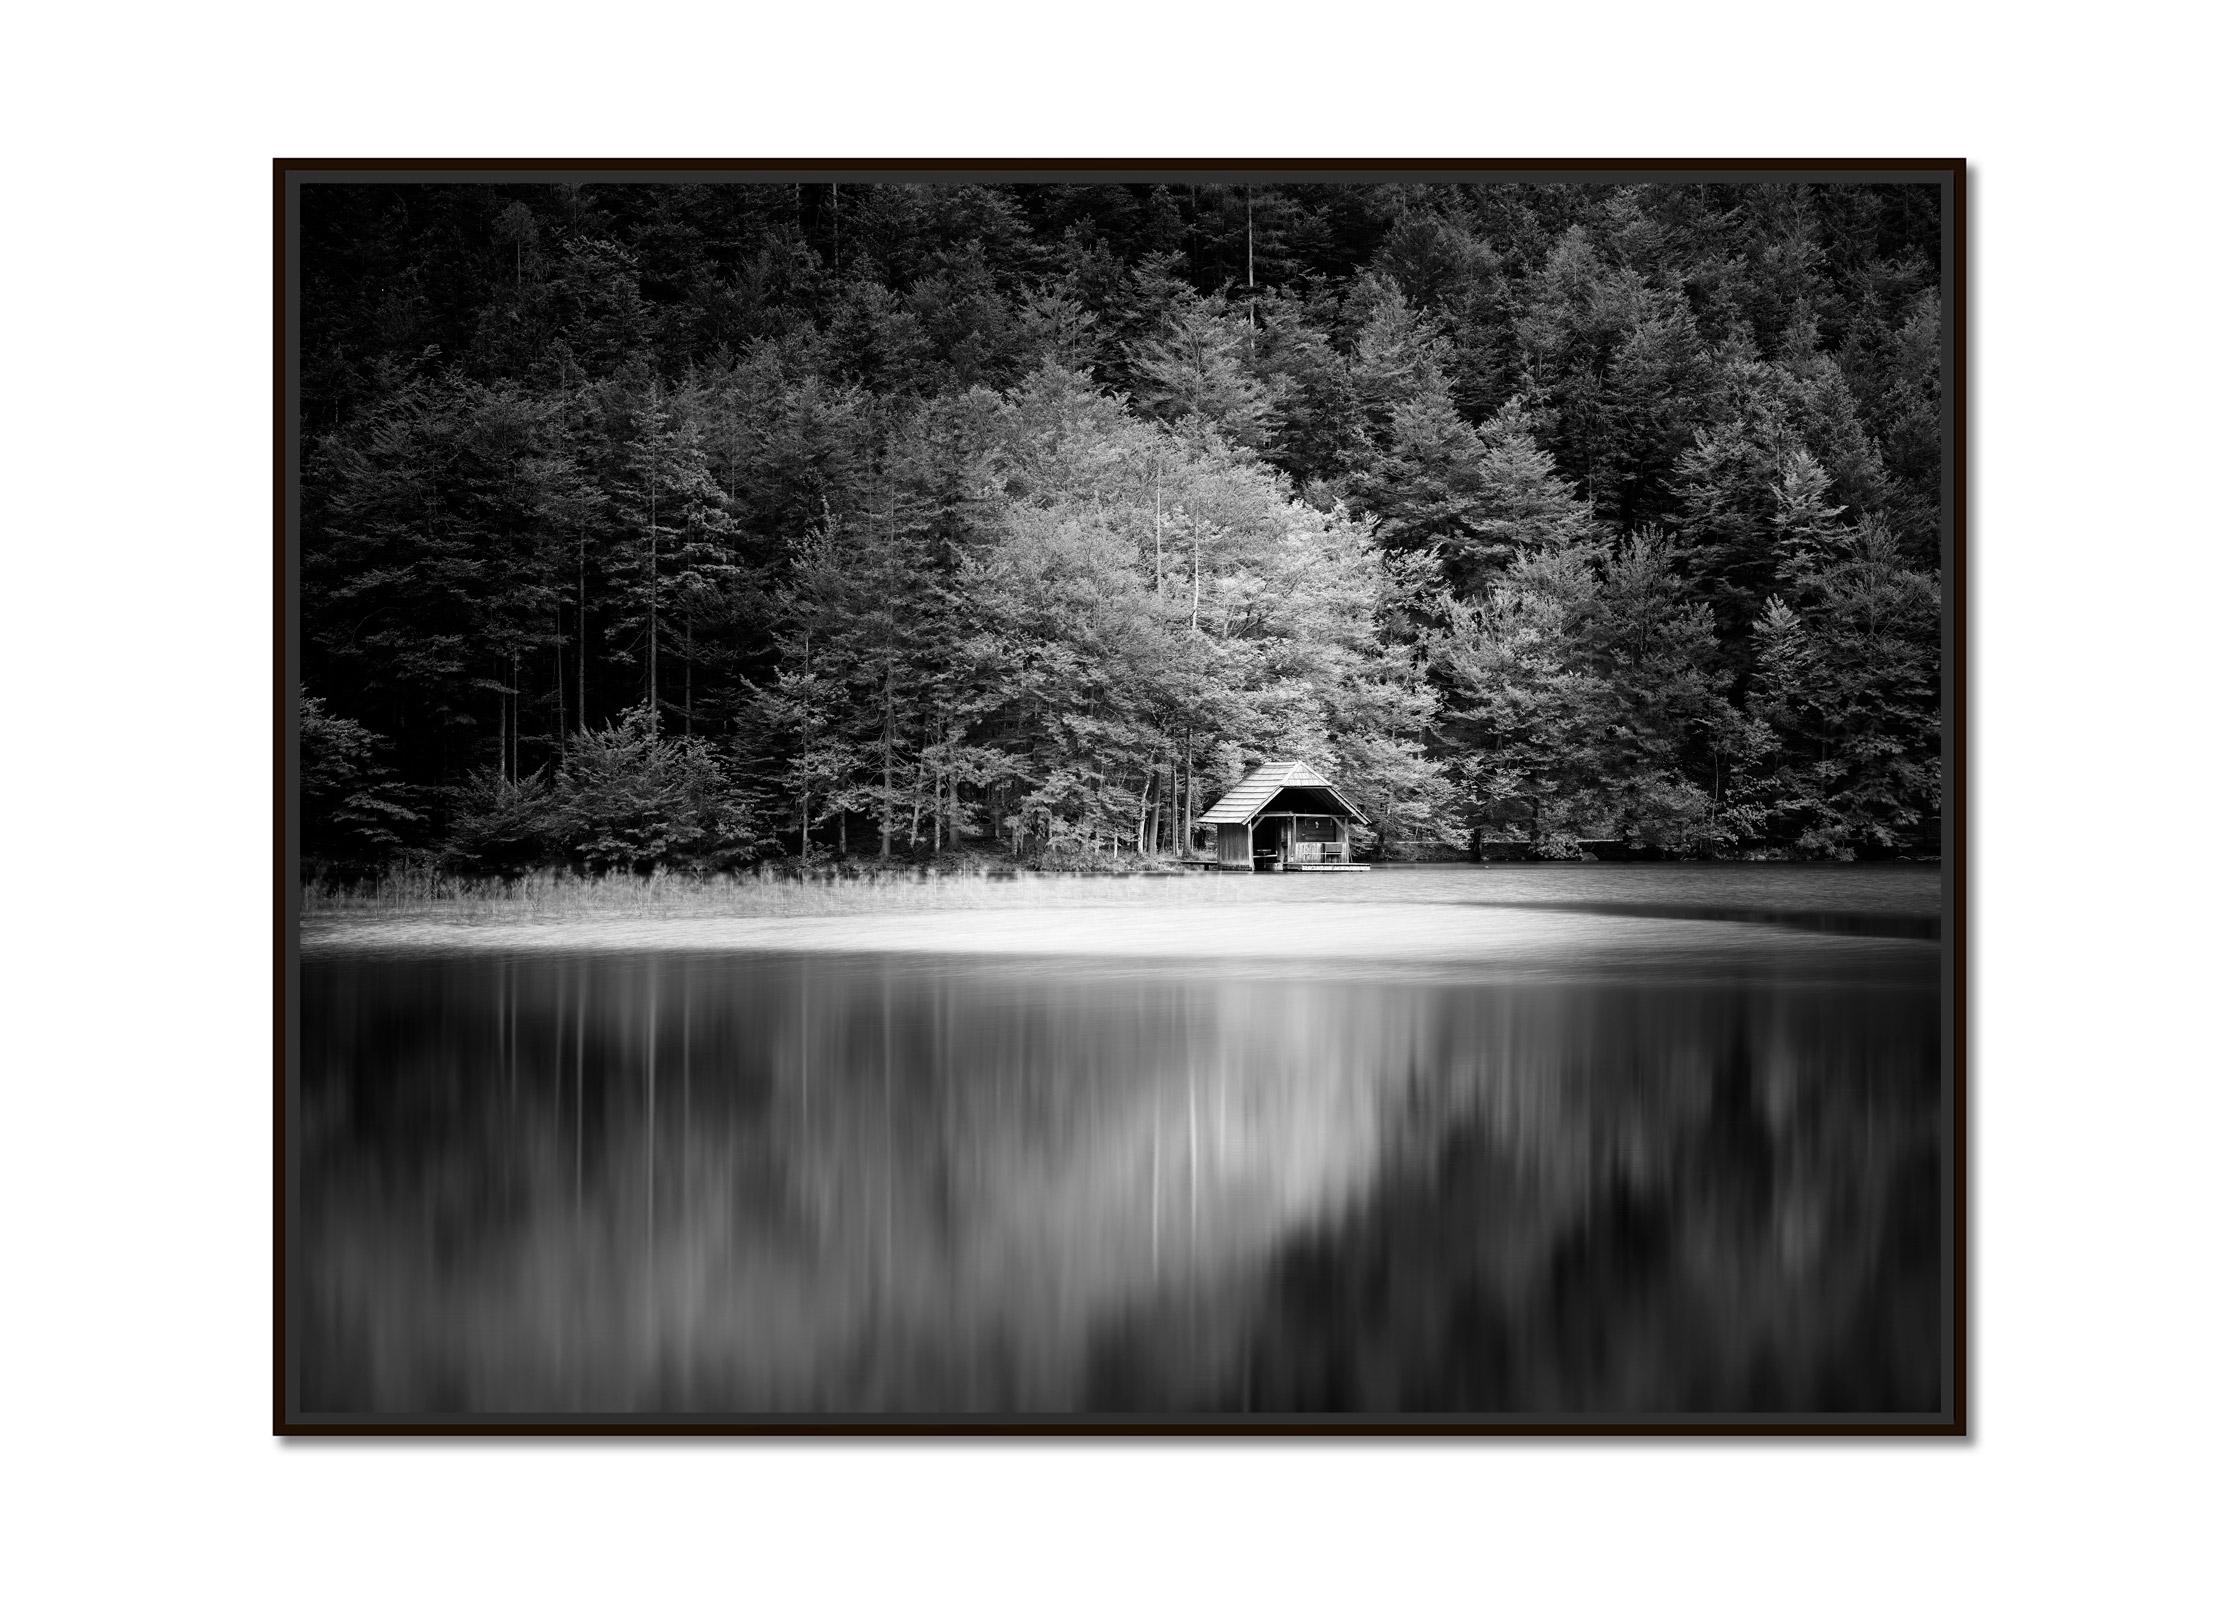 Wooden Boat House, Lake, Forest, Austria, black and white photography, landscape - Photograph by Gerald Berghammer